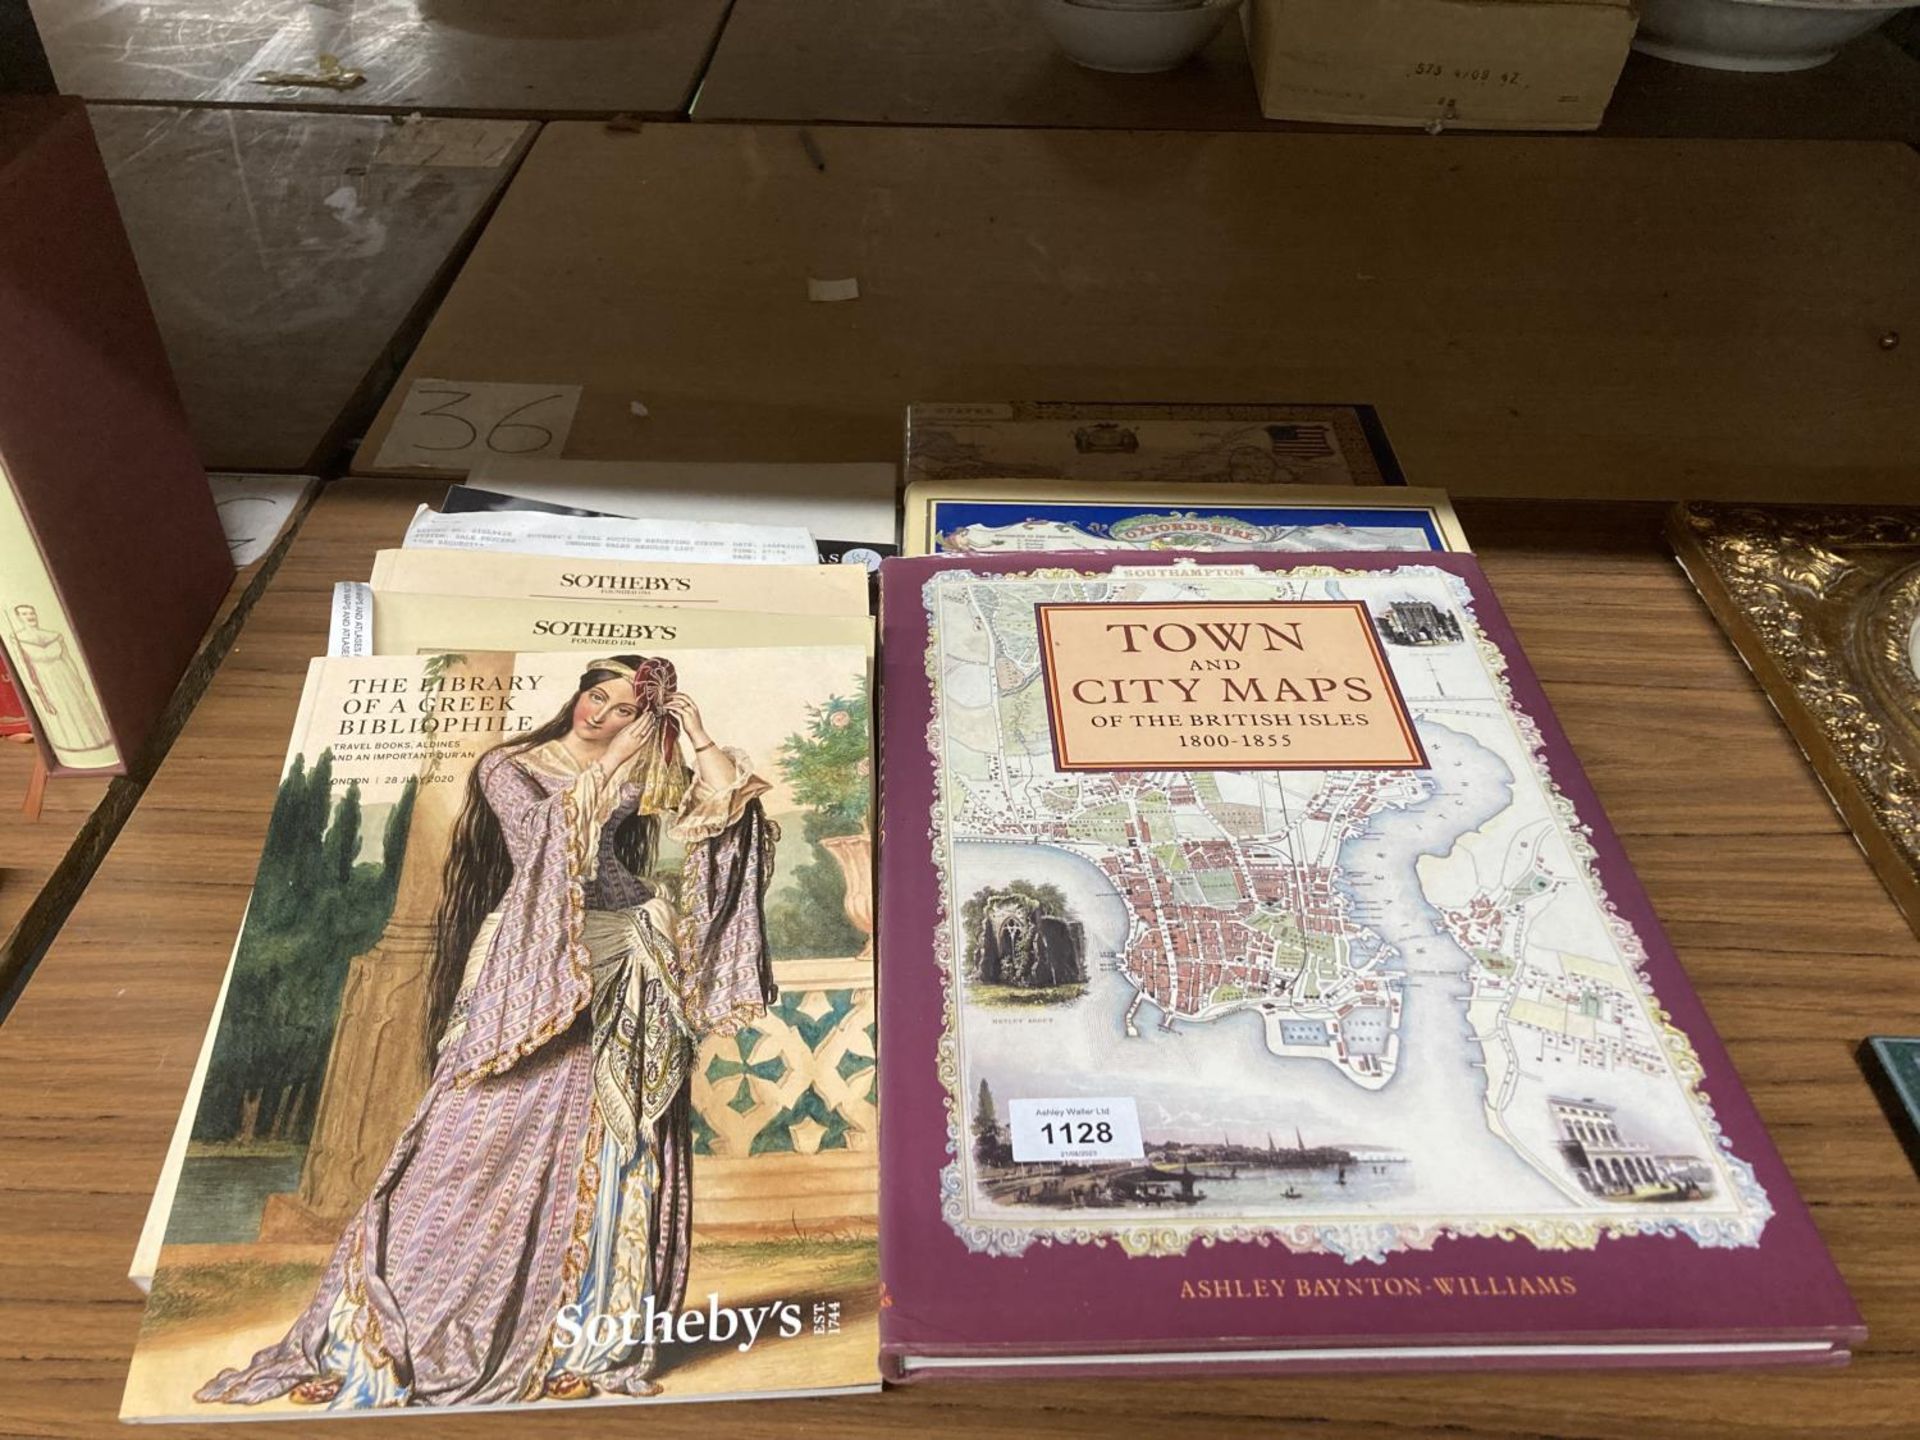 A COLLECTION OF BOOKS, SOTHEBYS CATALOGUES, TOWN AND CITY MAPS ETC